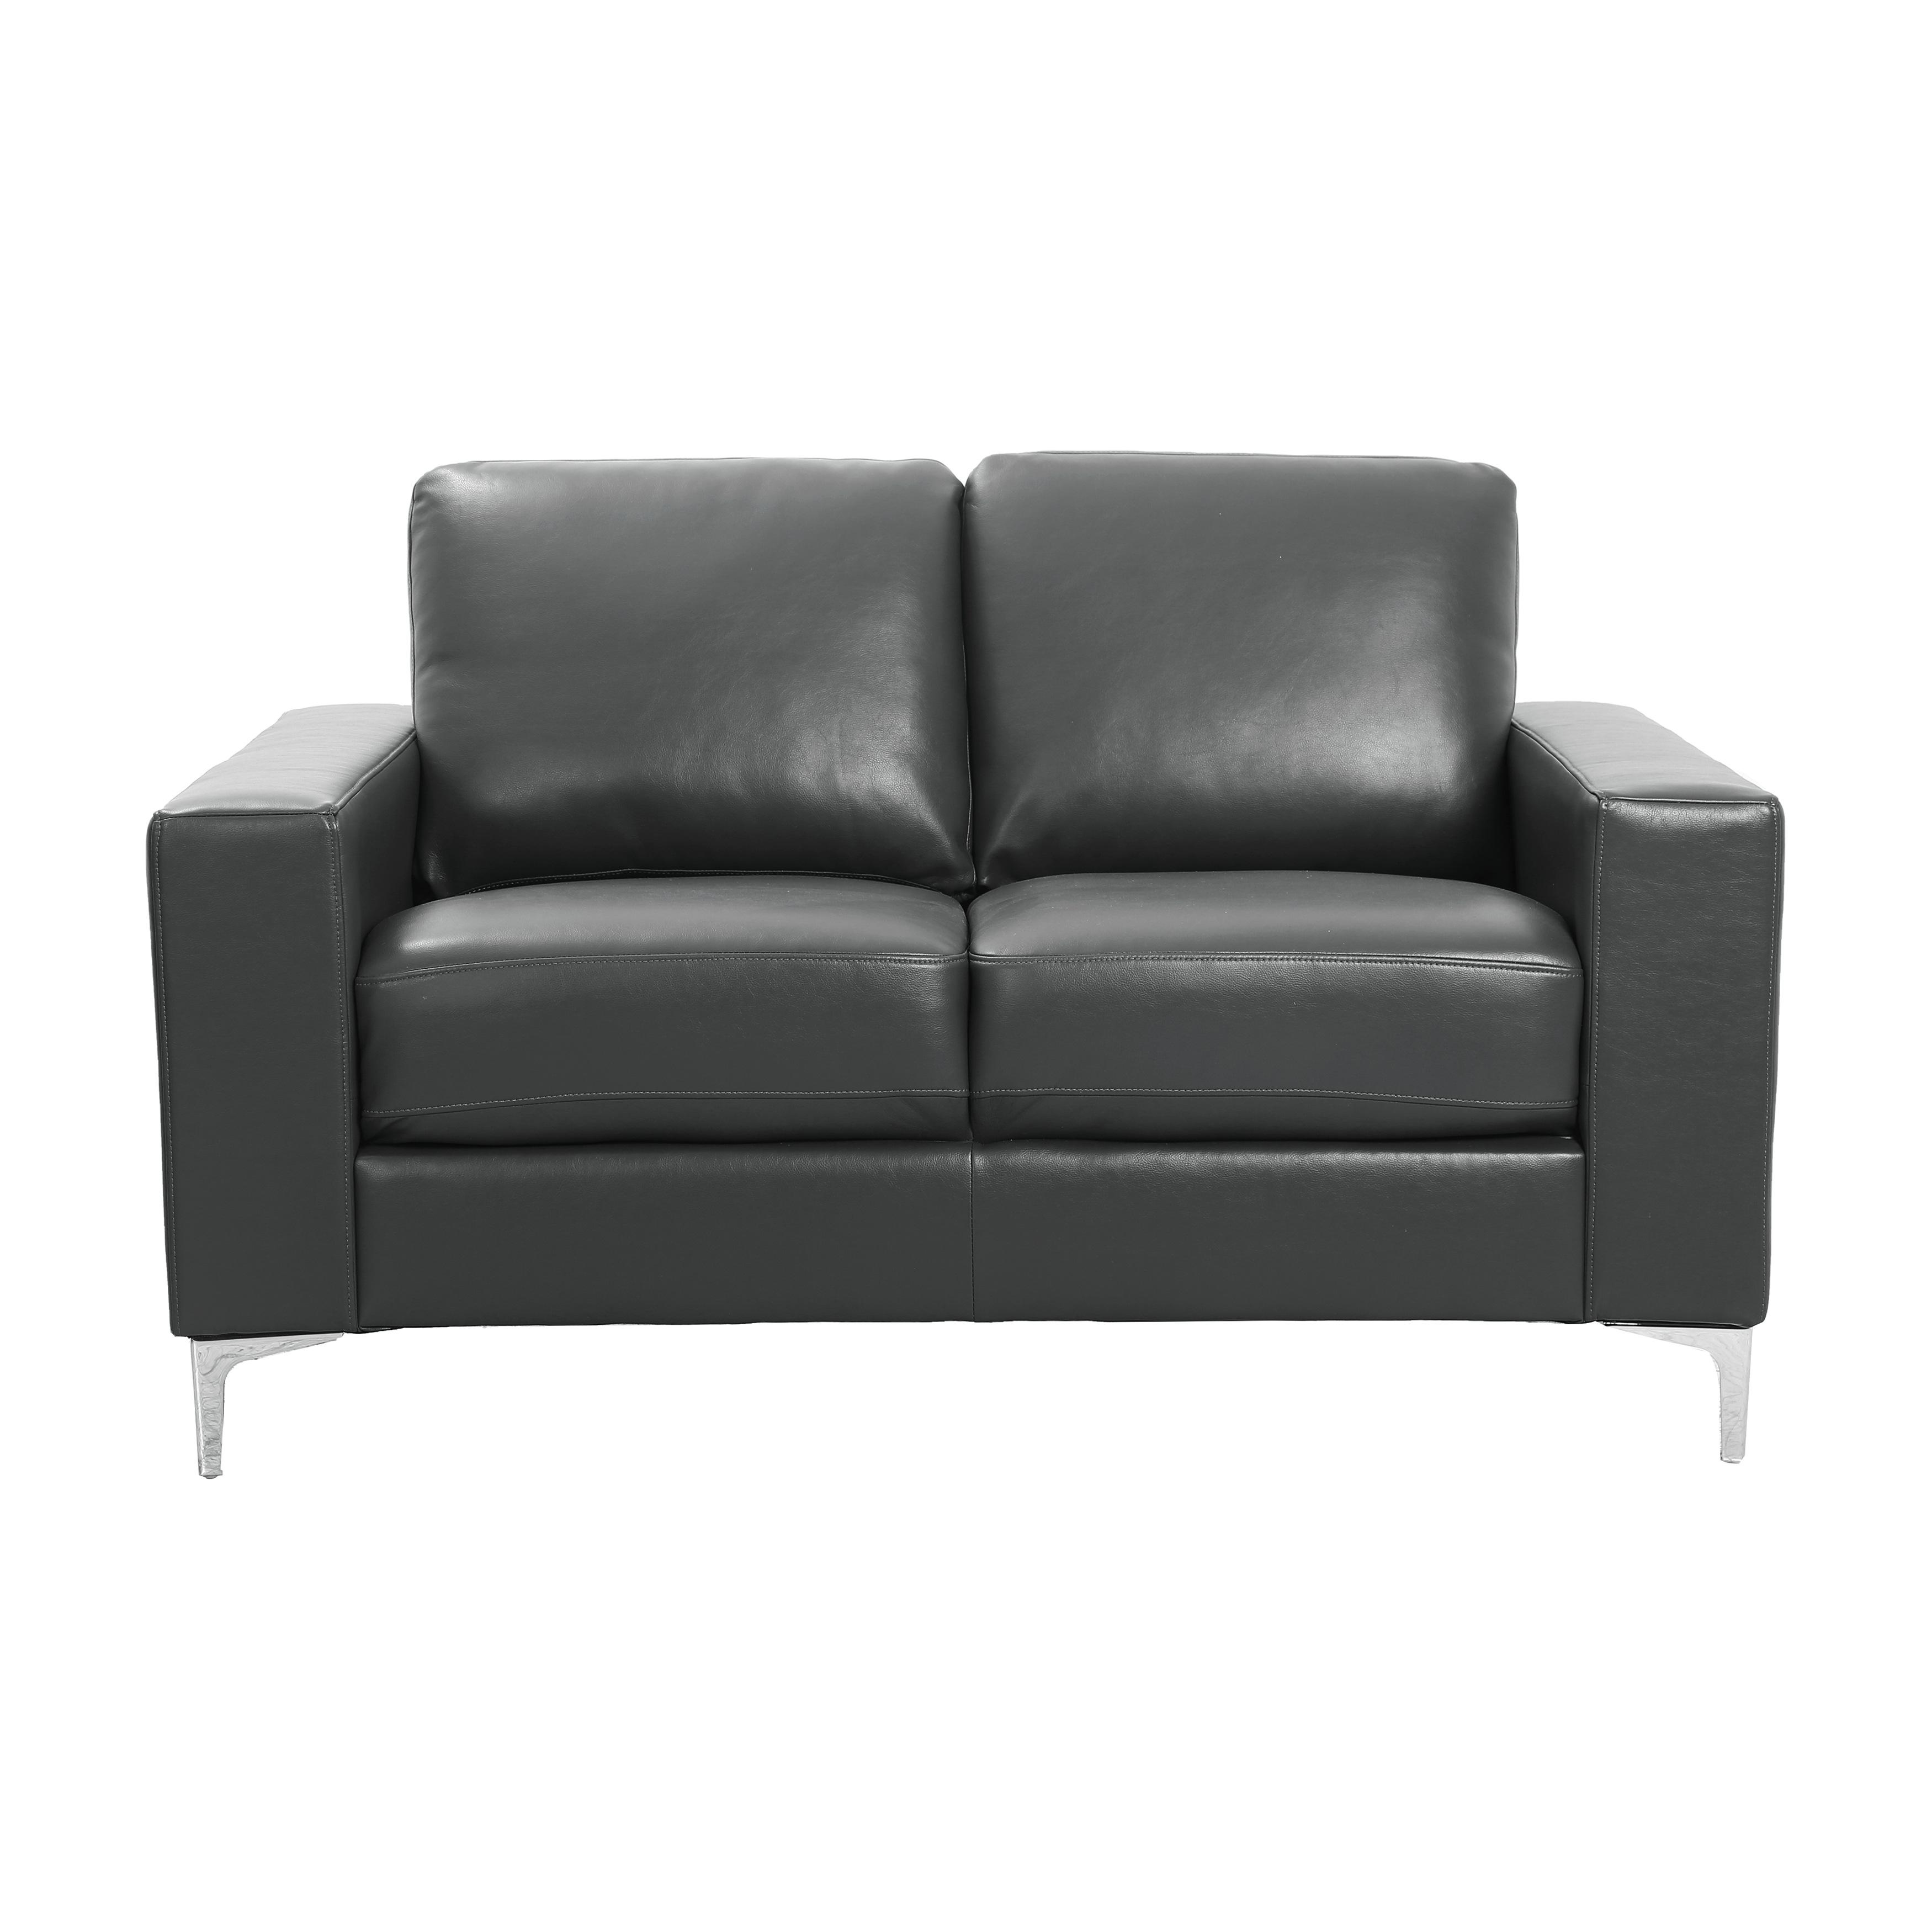 Contemporary Loveseat 8203GY-2 Iniko 8203GY-2 in Gray Faux Leather